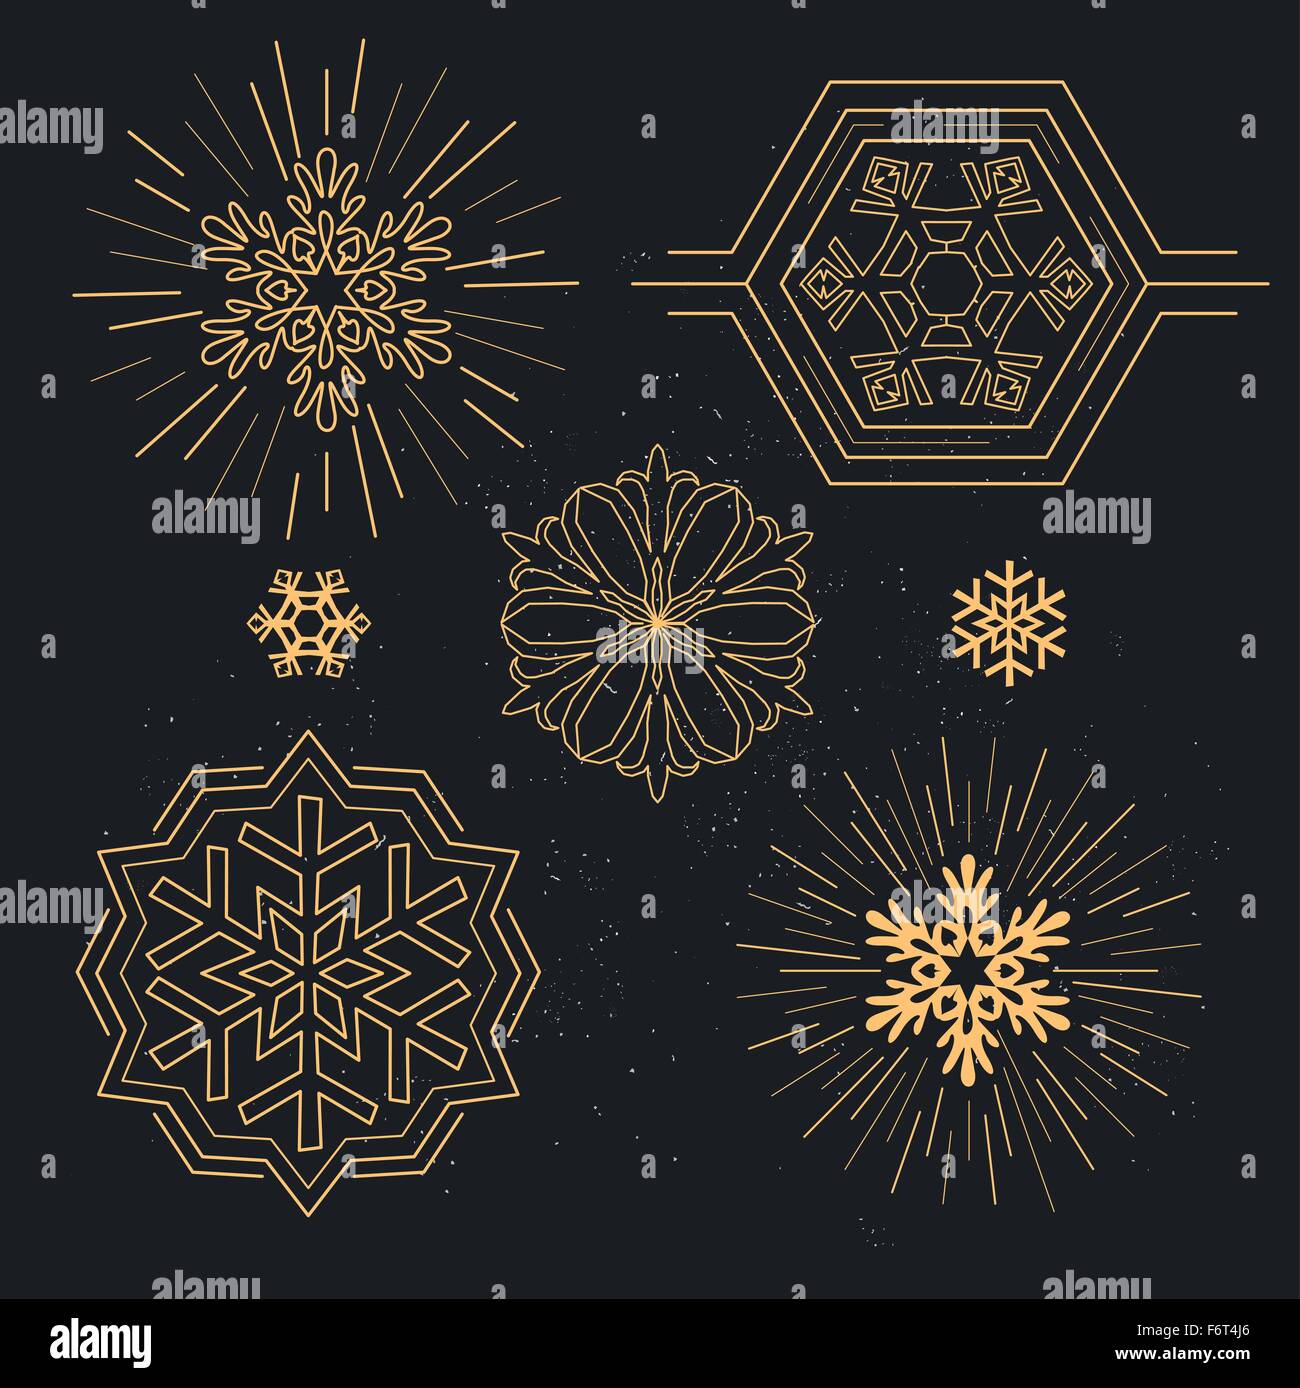 Snowflake Patterns. Geometric lined snowflakes. Vector illustration. Stock Vector